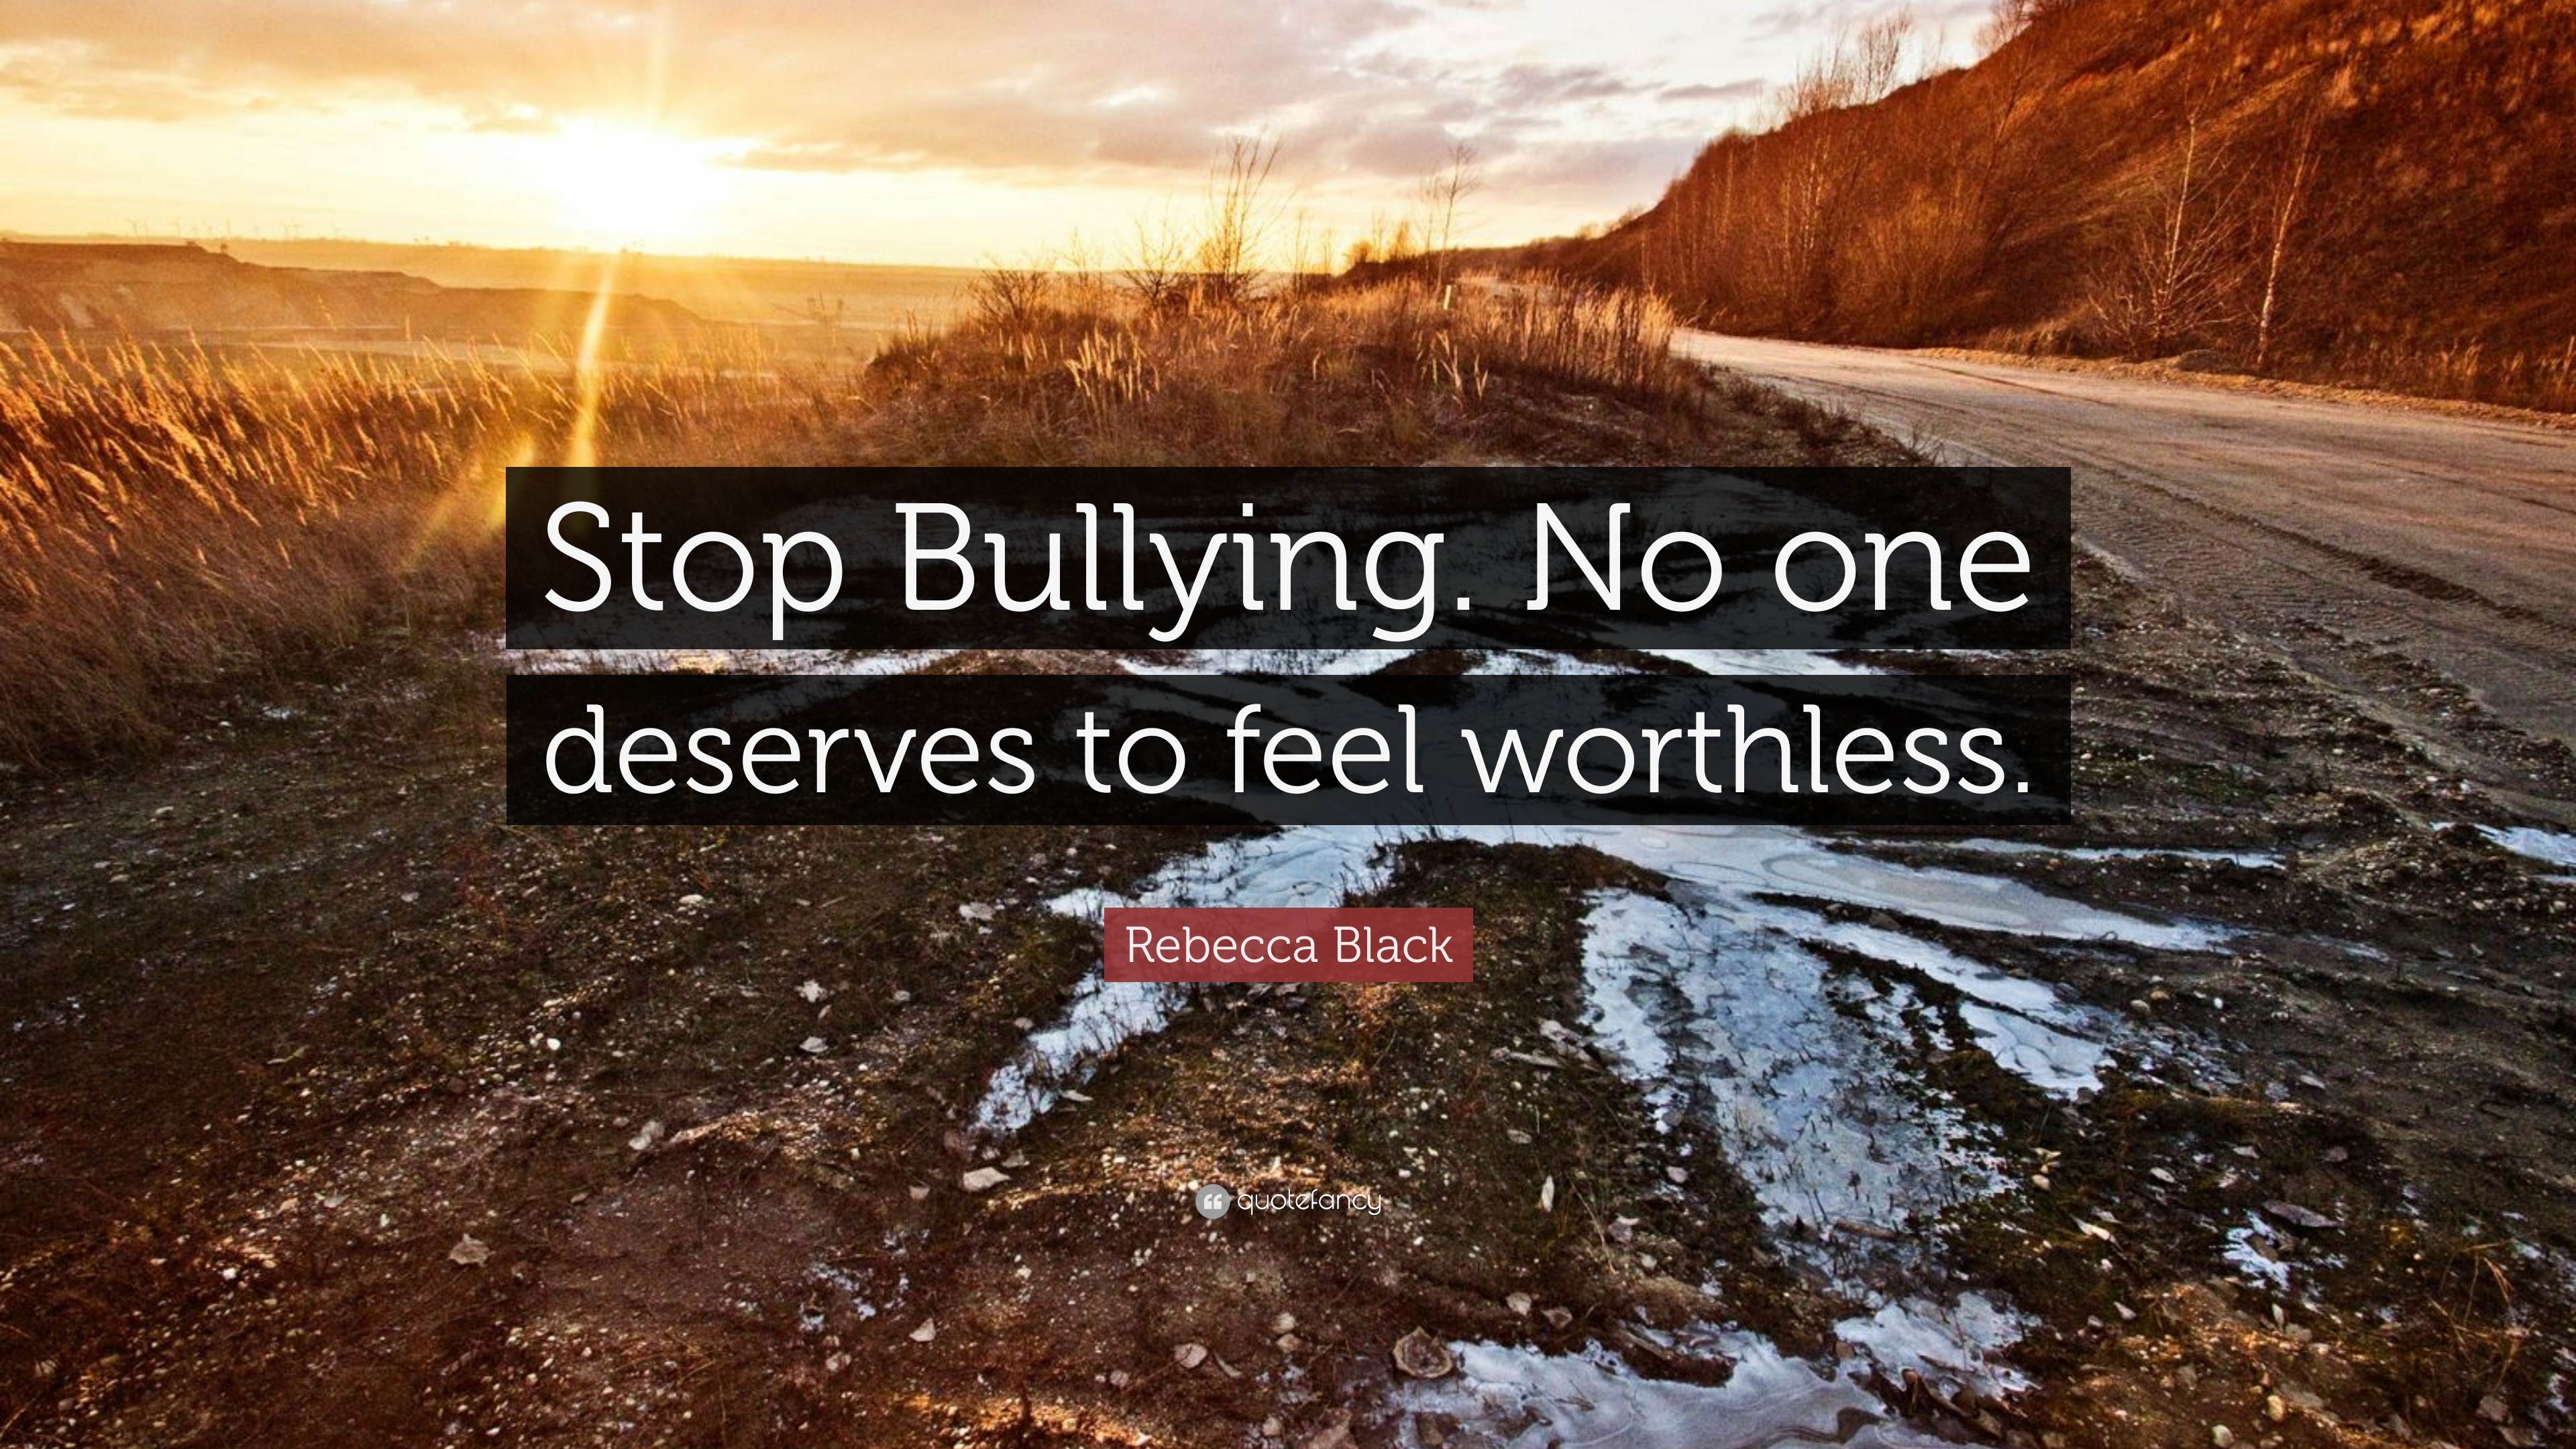 Rebecca Black Quote: “Stop Bullying. No one deserves to feel worthless.”